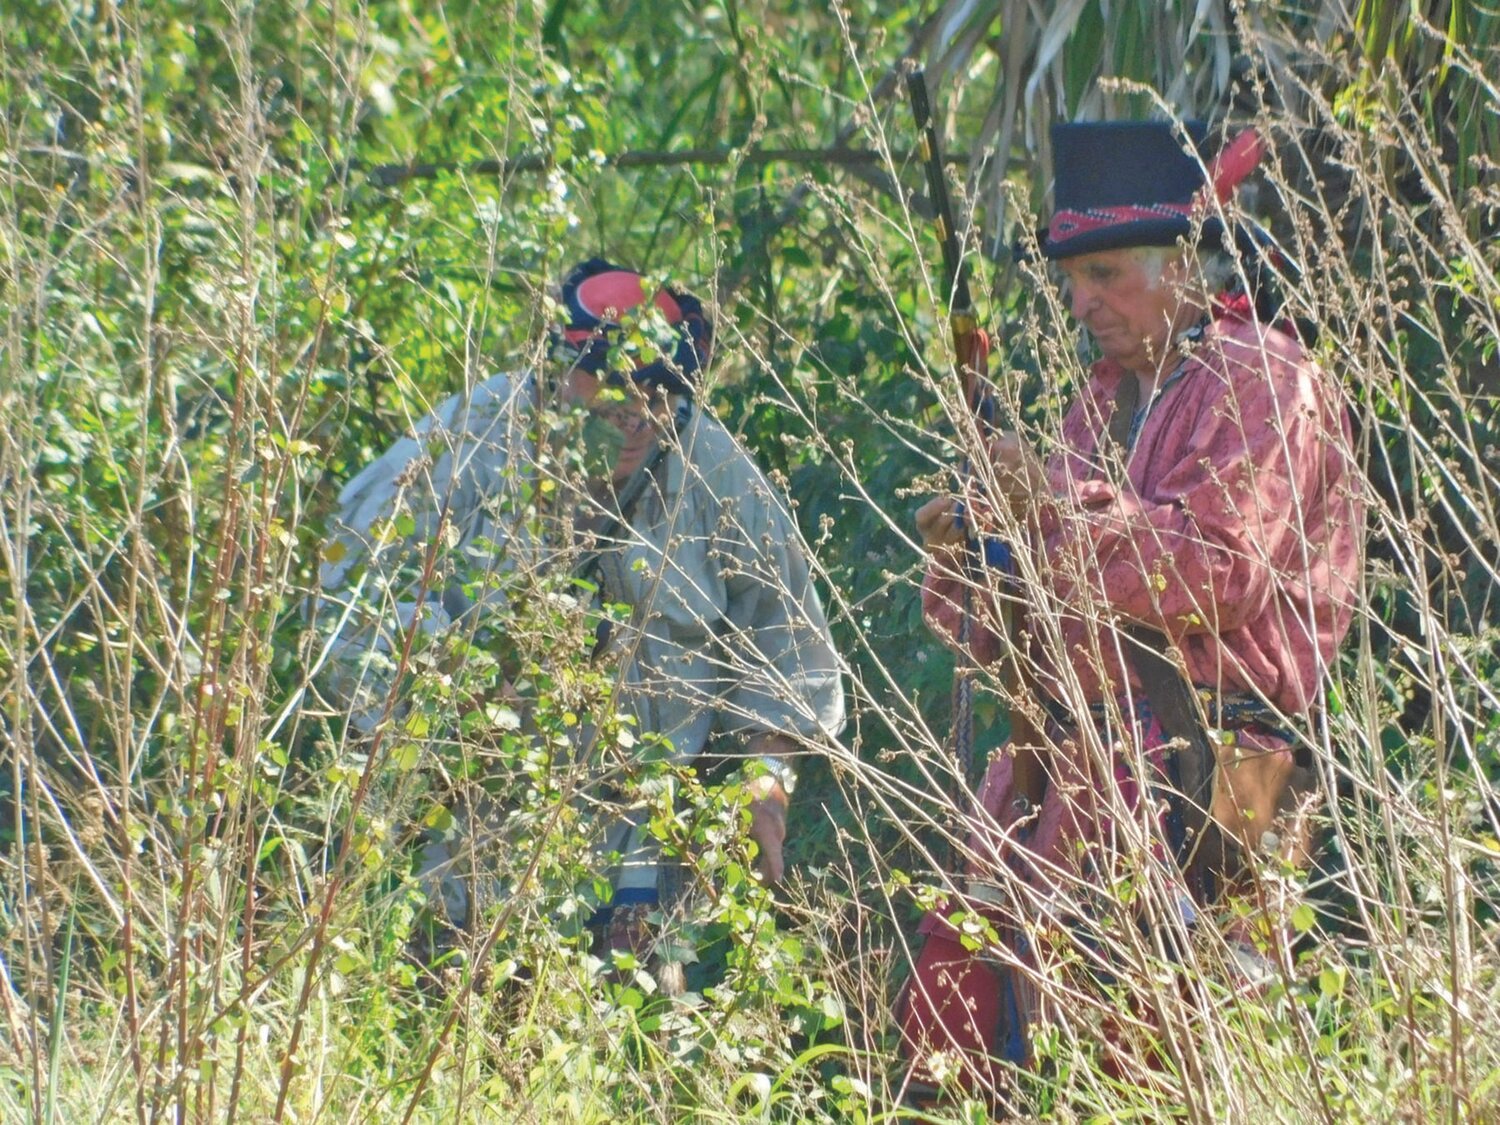 This picture is from a previous year of the Battle of Okeechobee Re-enactment.